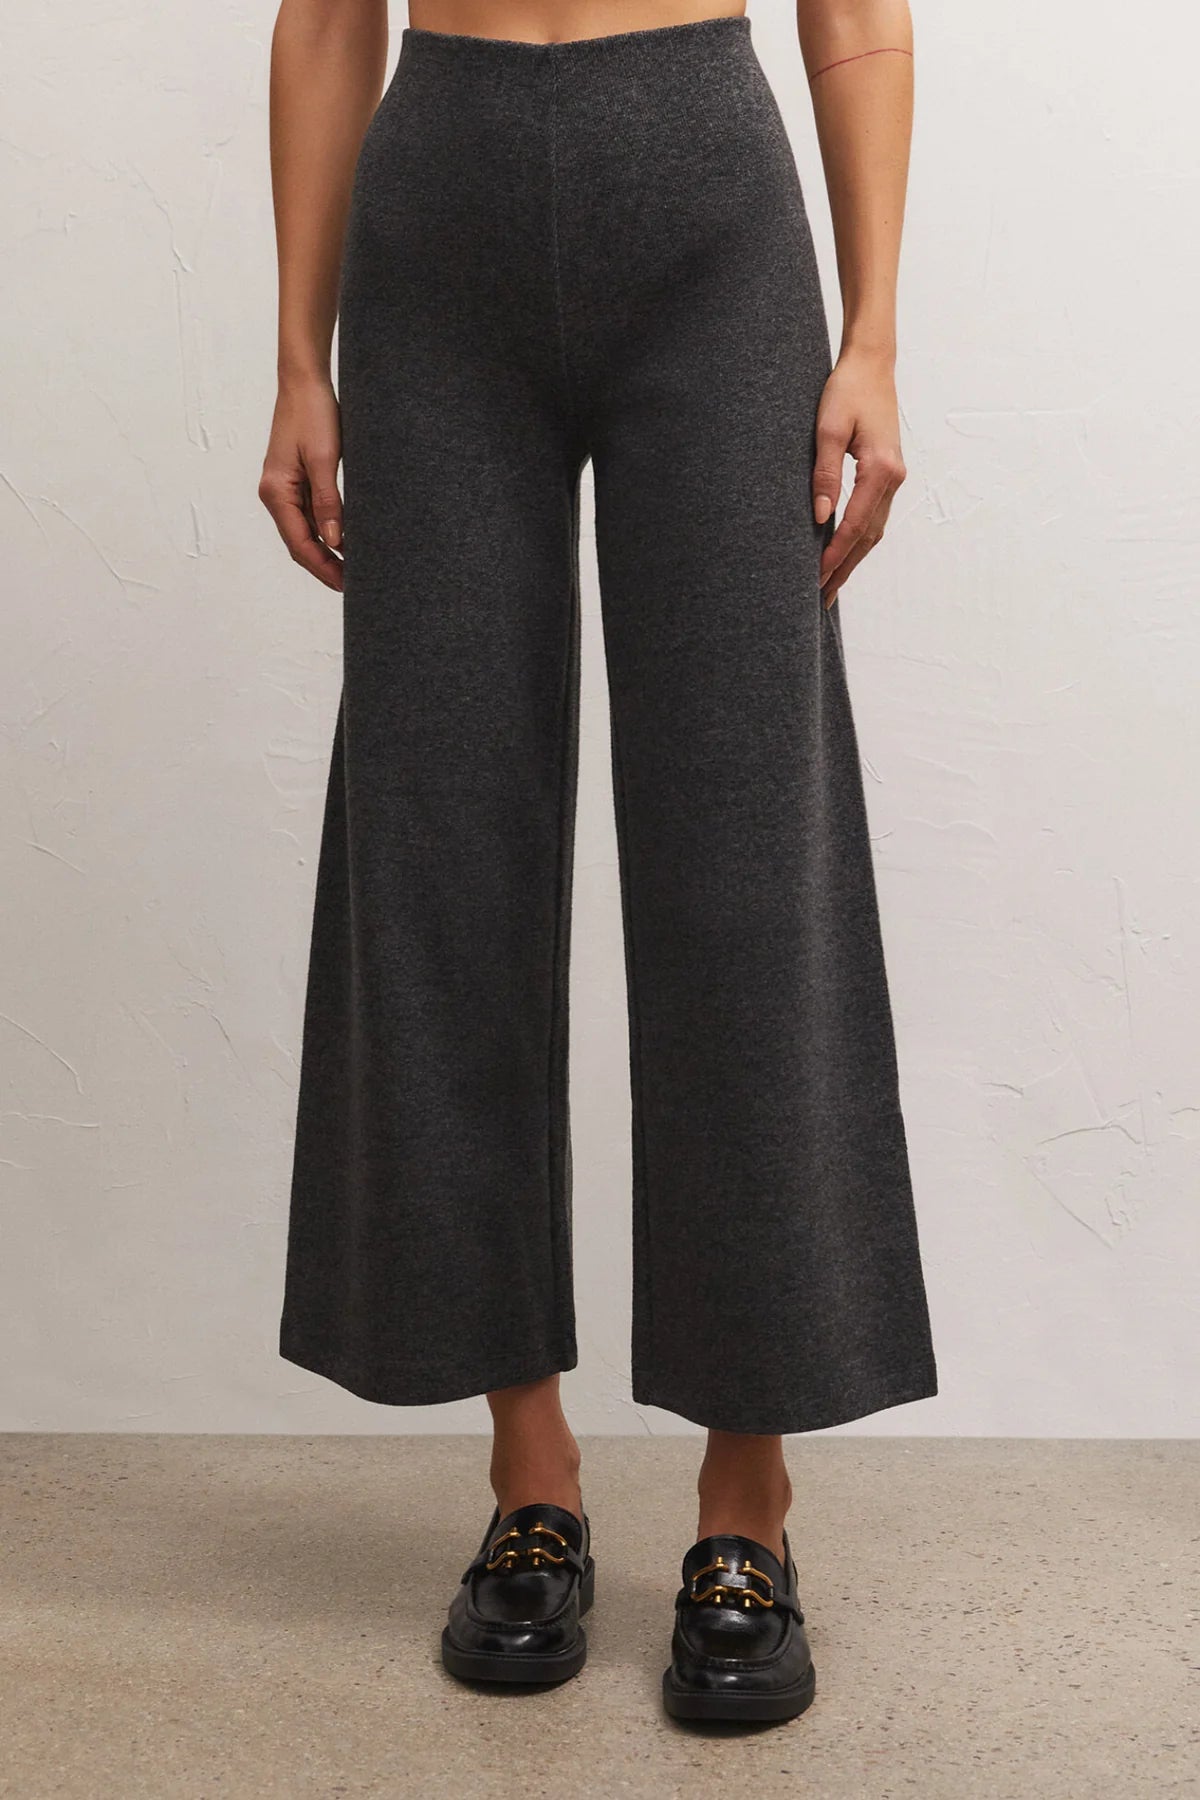 Delaney Brushed Rib Pant in Charcoal Heather